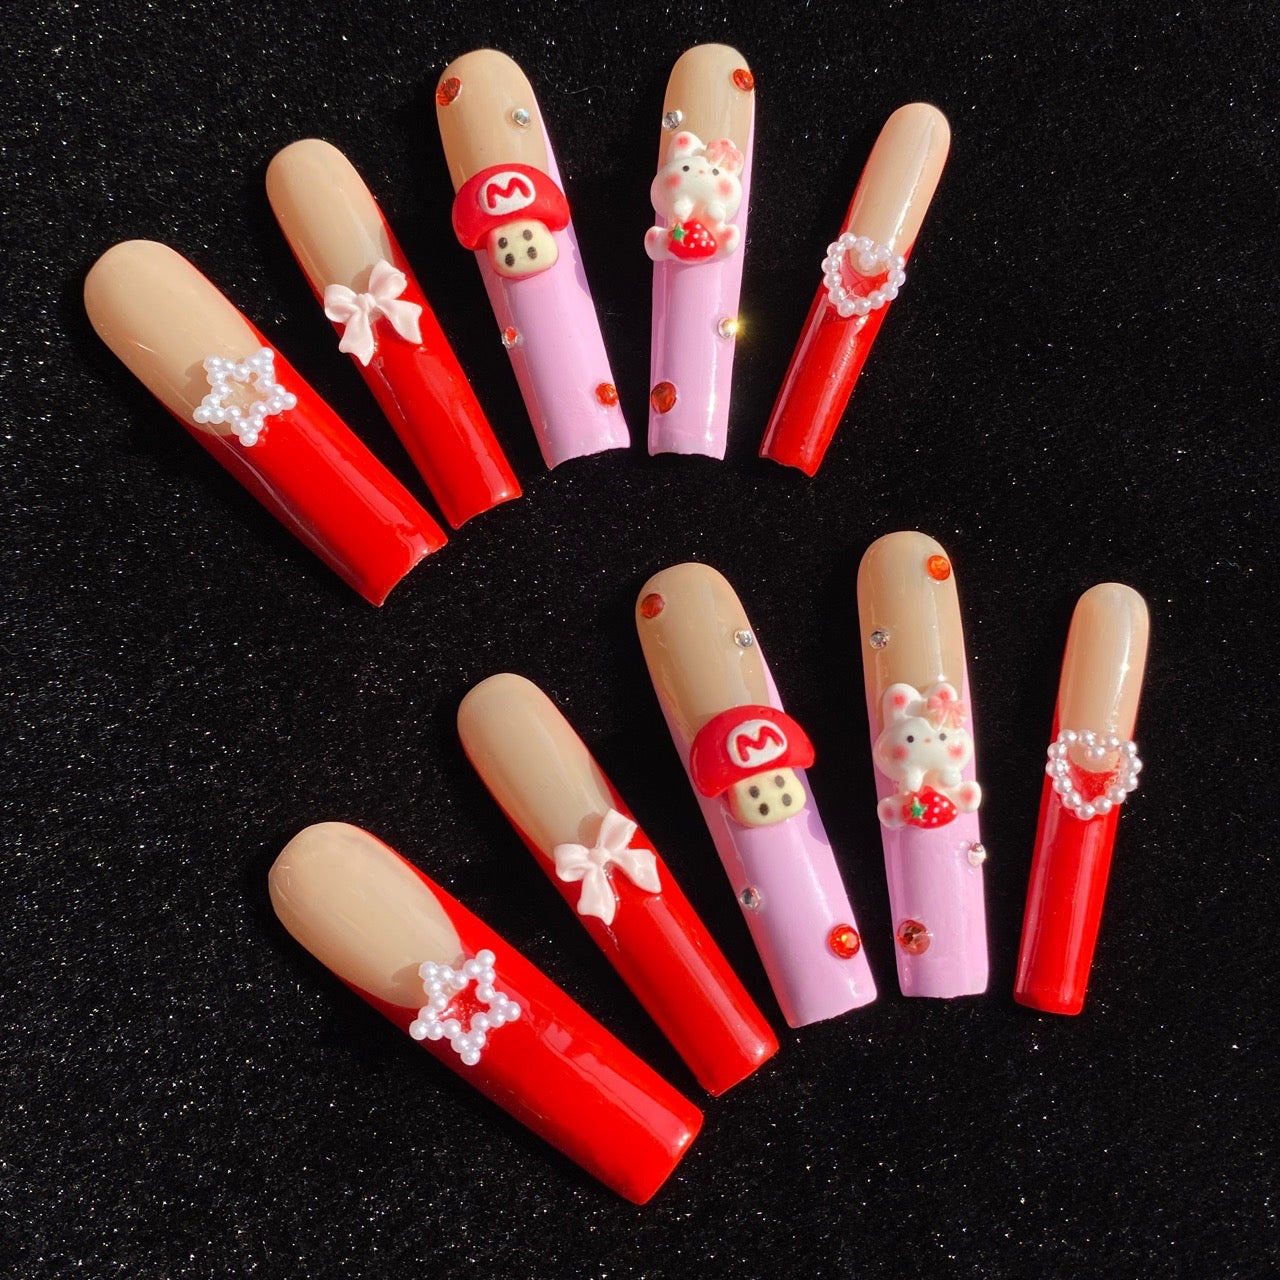 RABBIT-TEN PIECES OF HANDCRAFTED EXTRA LONG PRESS ON NAIL